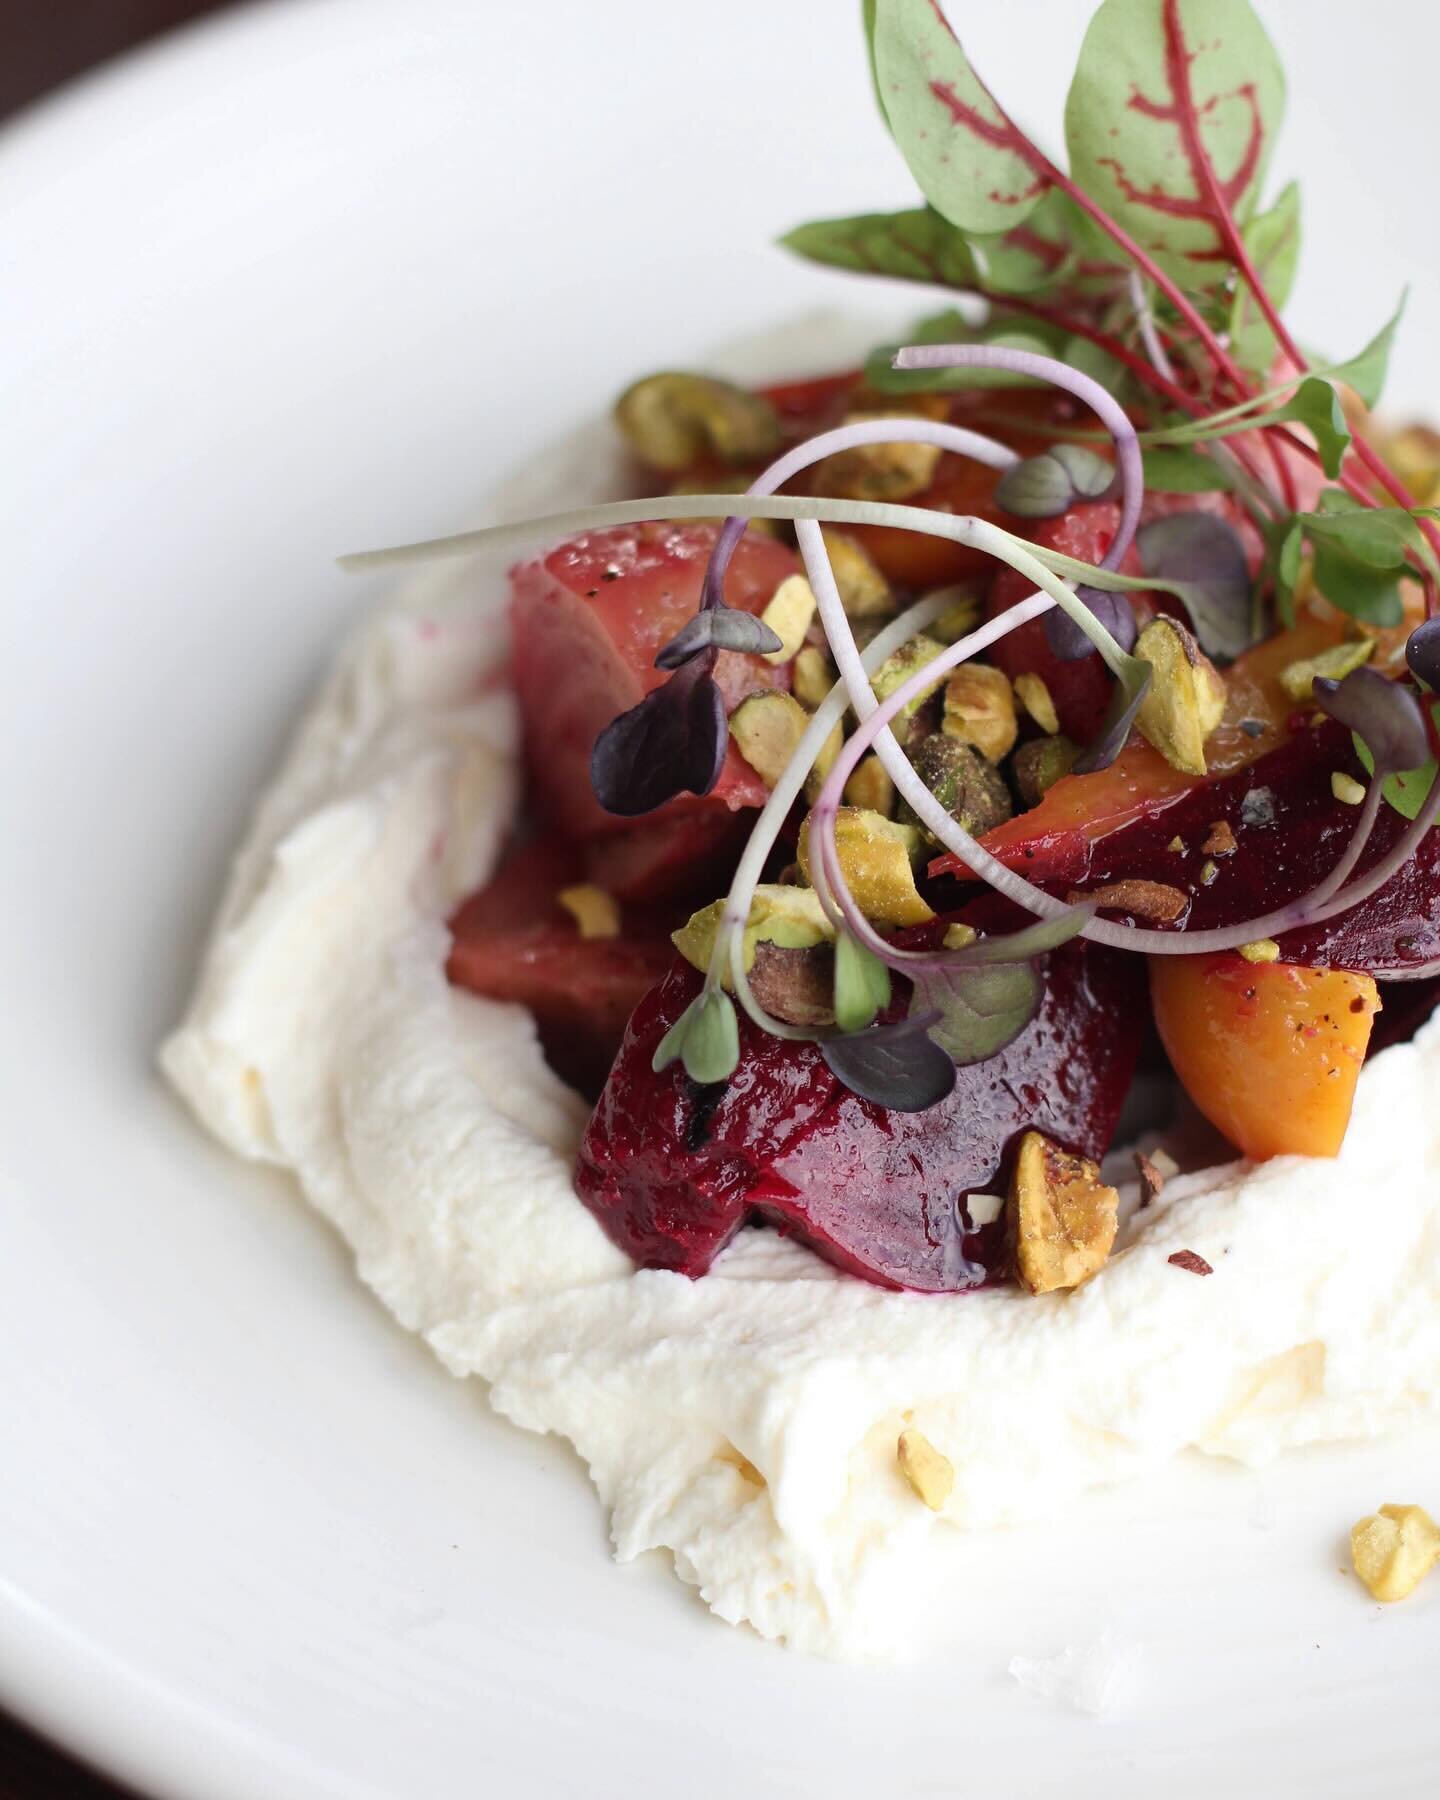 Earthy beets, airy ricotta and salty pistachios make this contorni one of our favorites! And it&rsquo;s pretty to look at